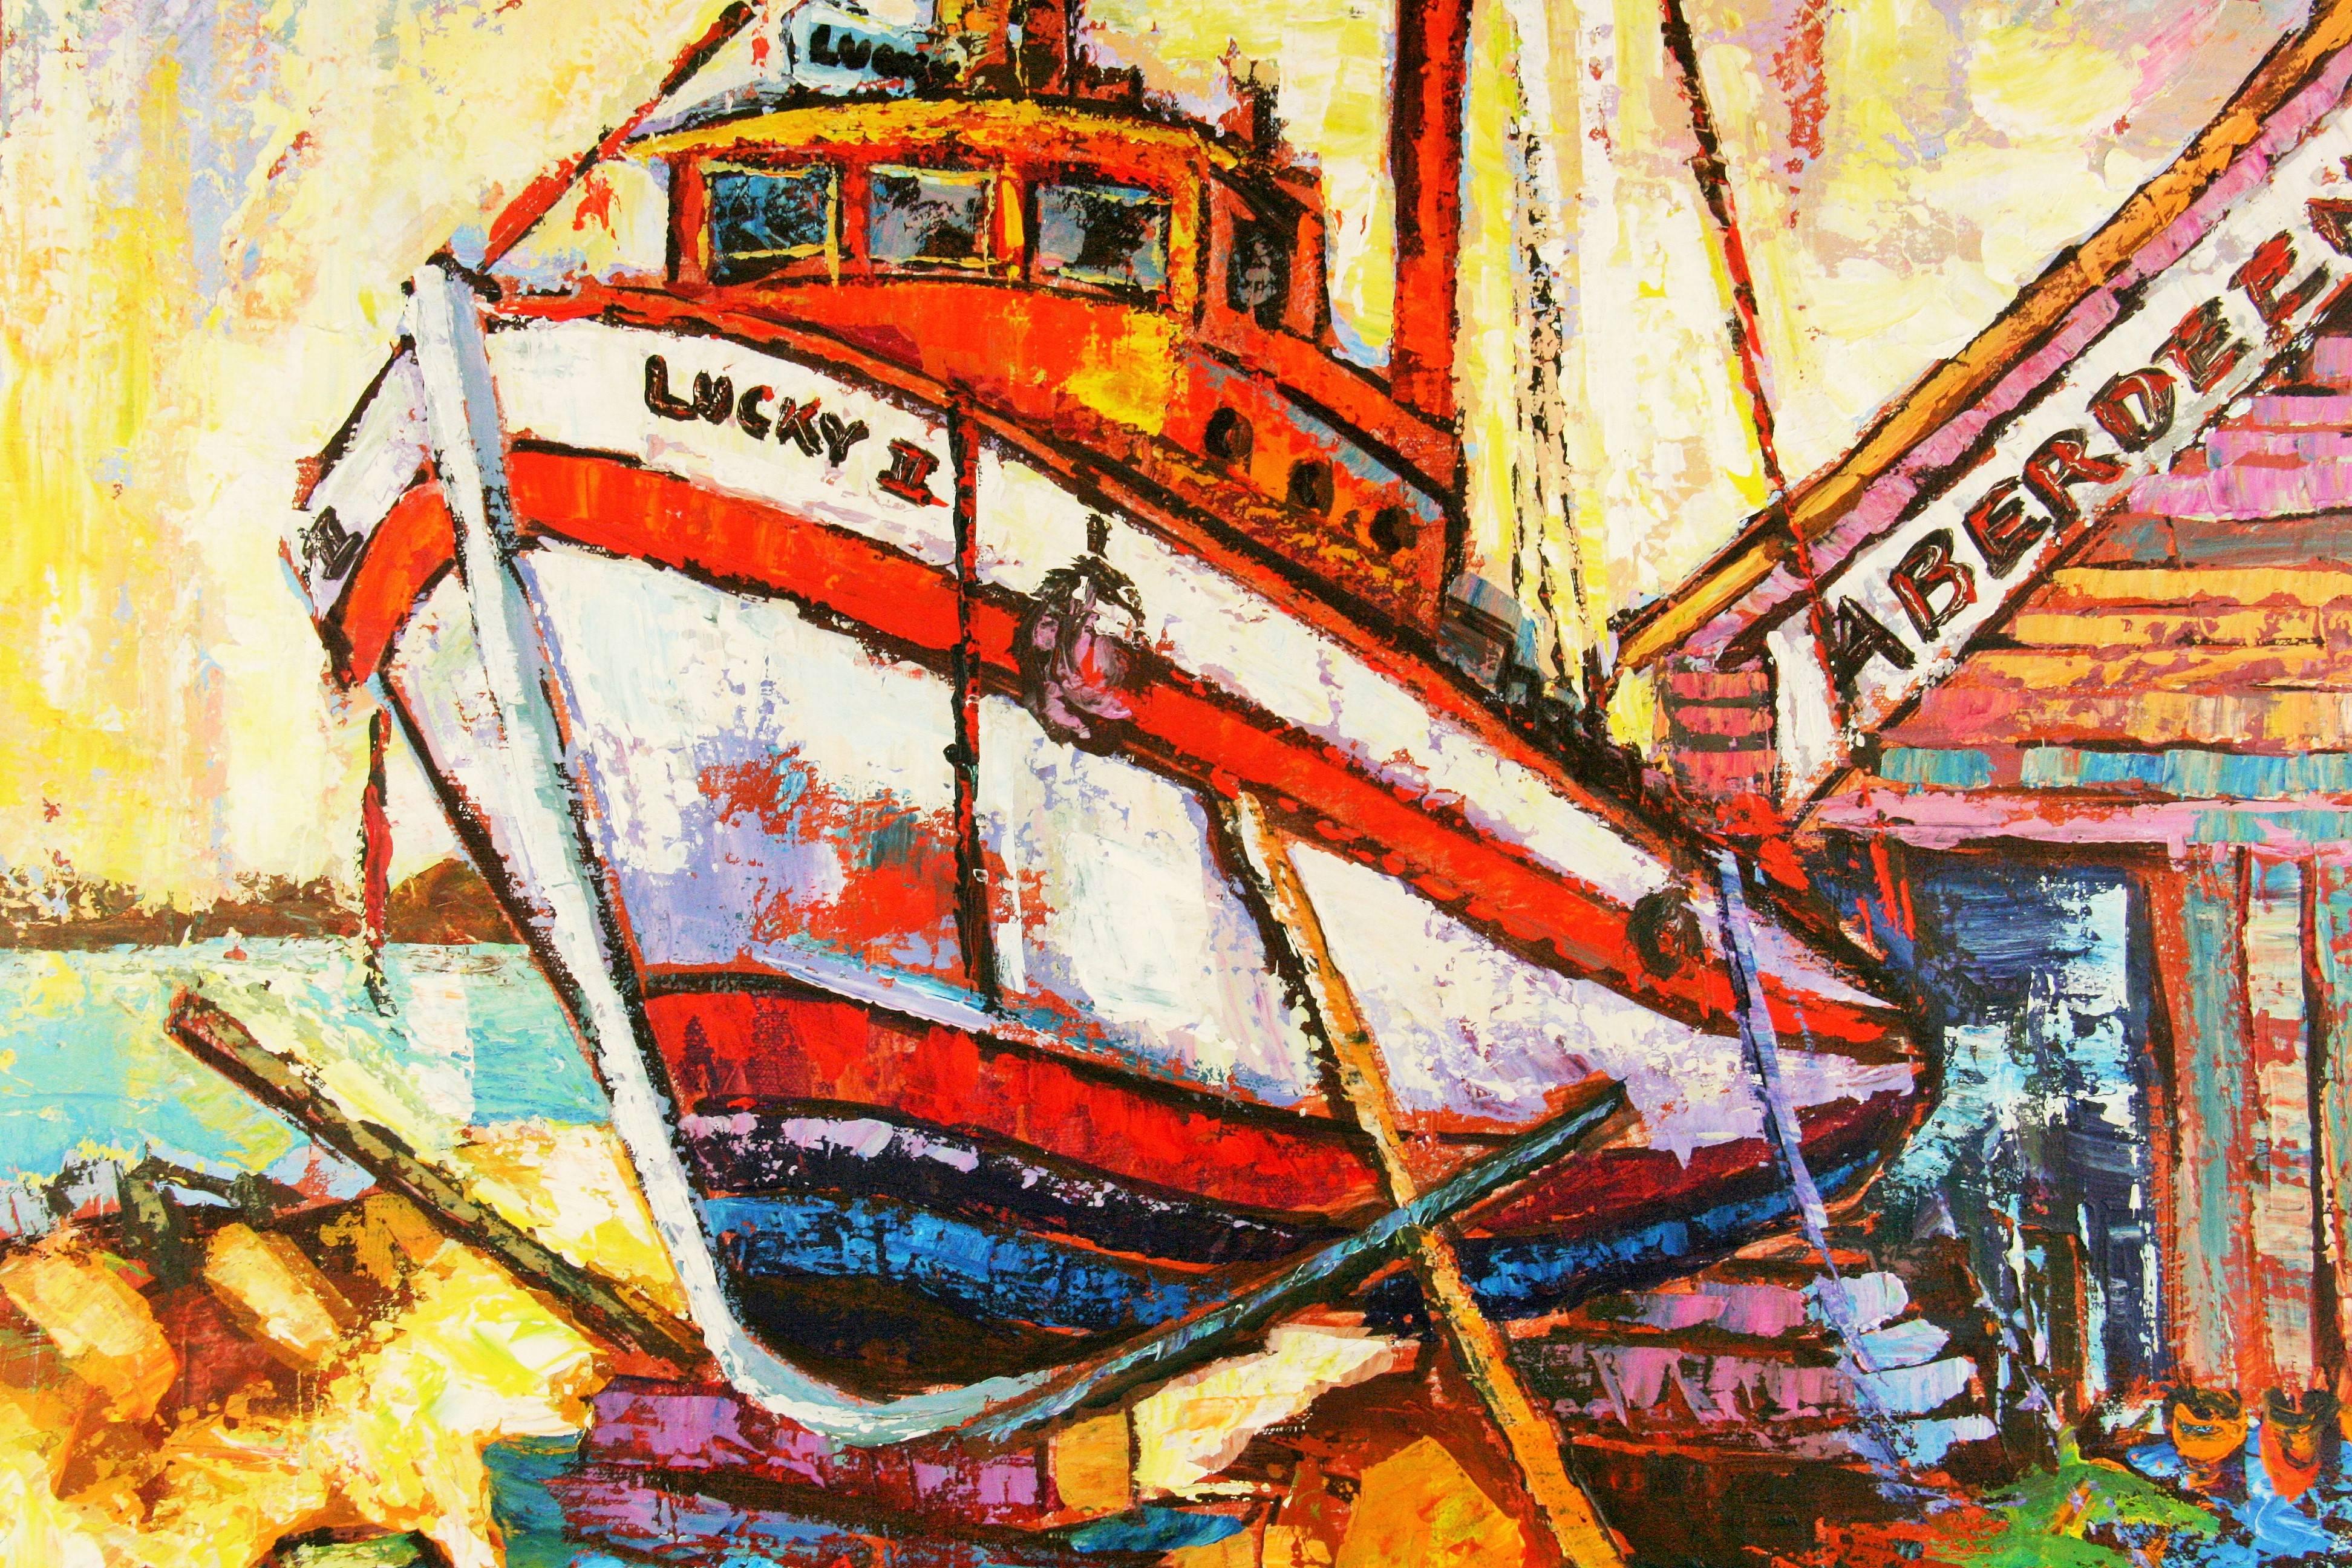 5-2408 Colorful acrylic abstract on canvas of a boat in dry dock by Newsom.
Unframed acrylic on stretched canvas